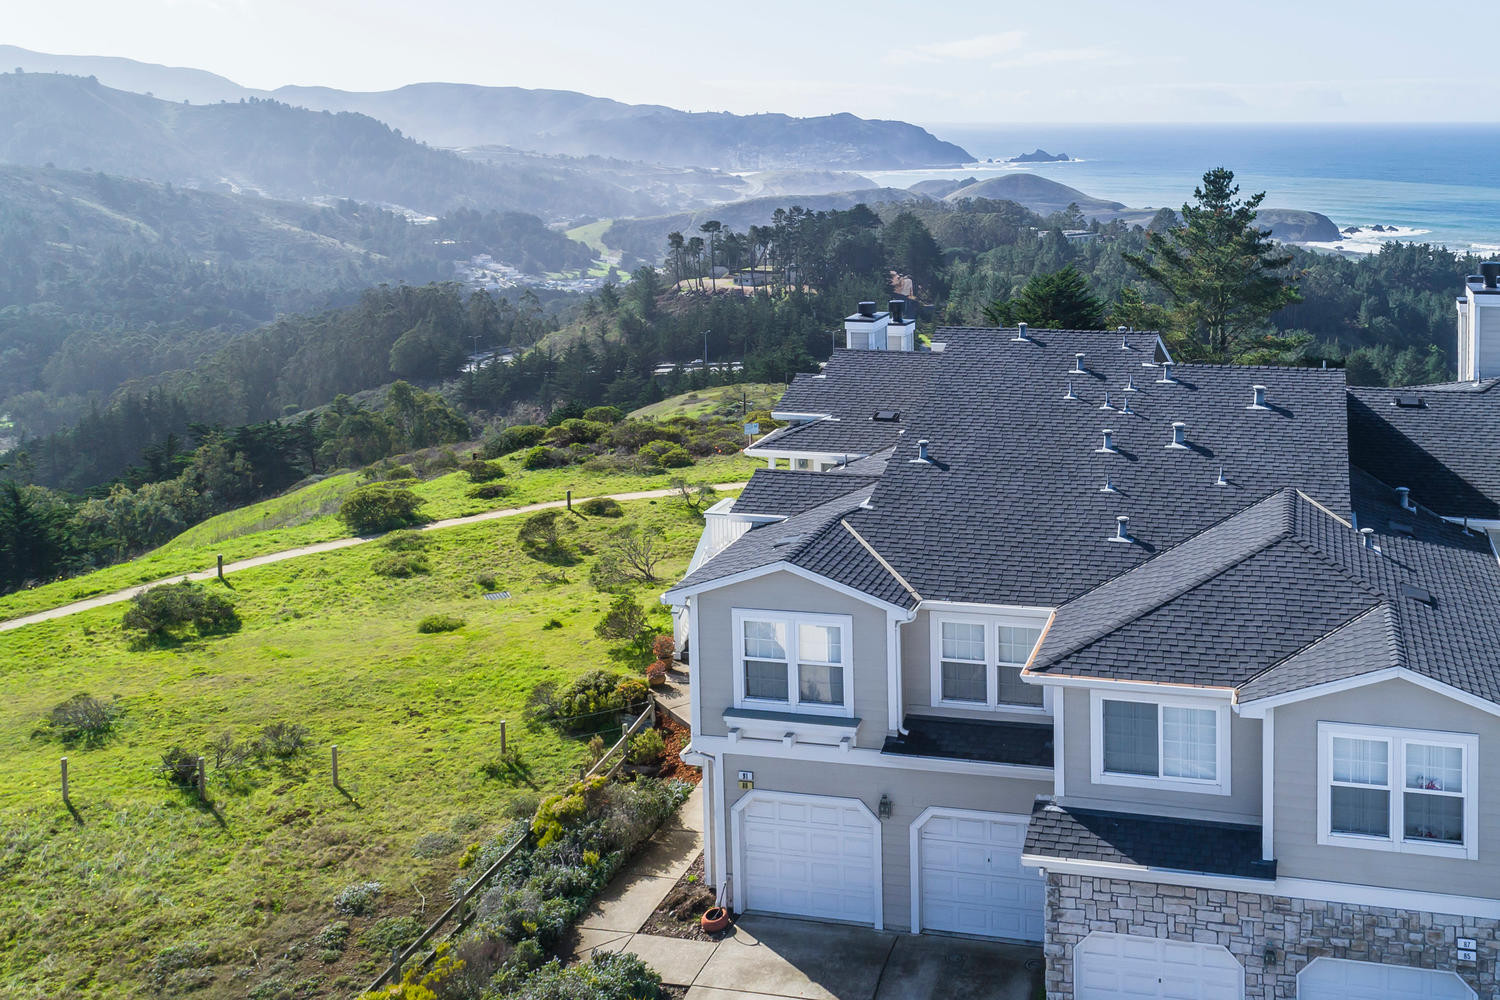 89 Outlook Circle Drone Shot in East Sharp Park Neighborhood in Pacifica.